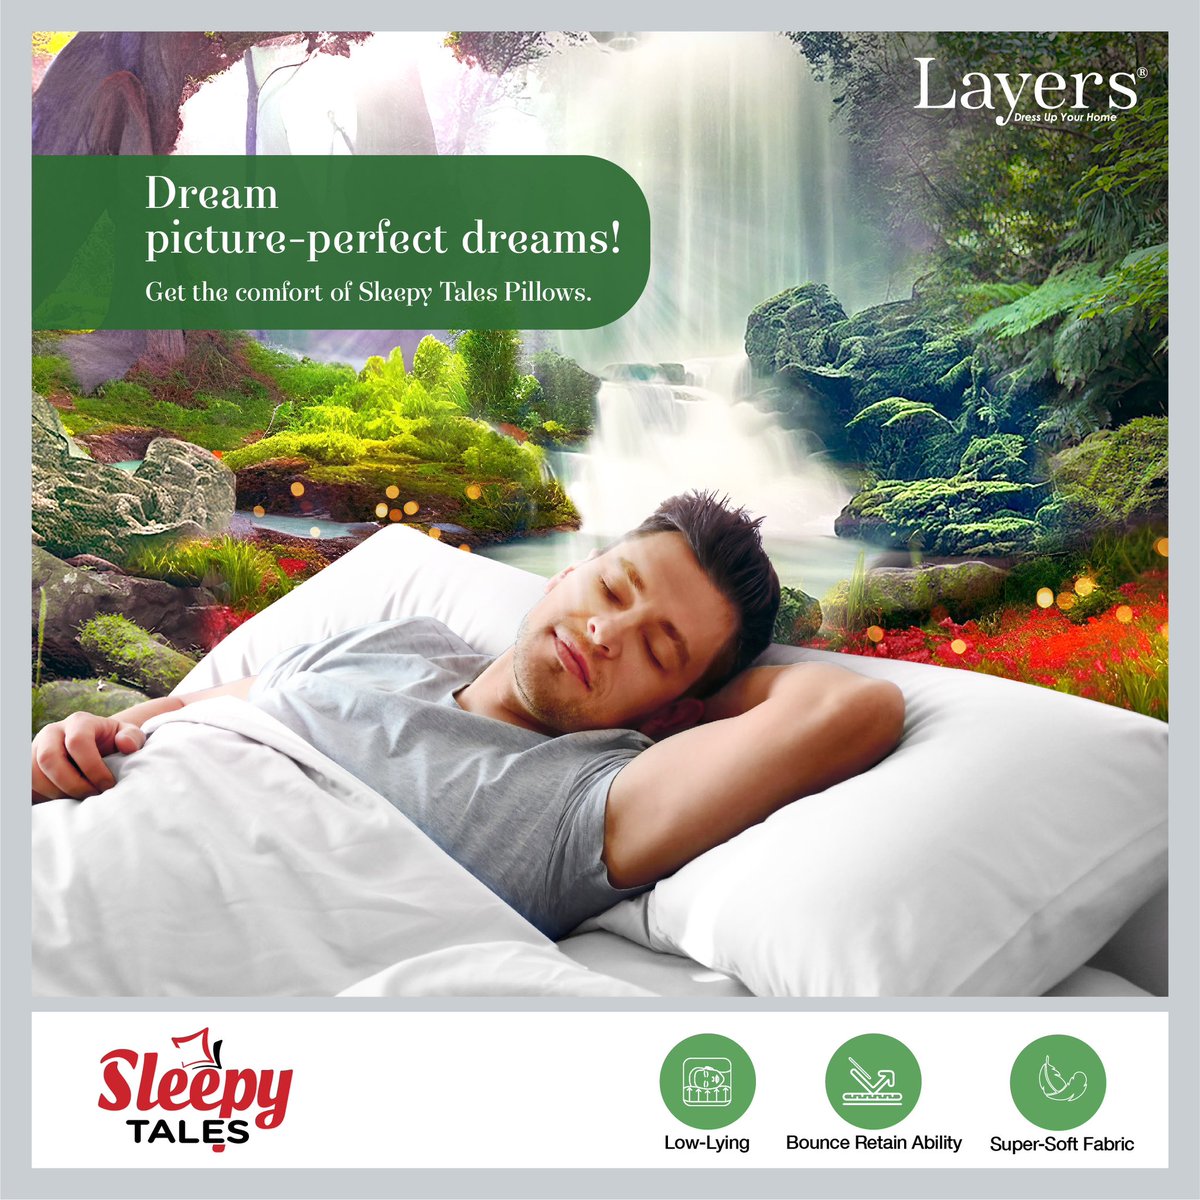 Perfect support pillows that take you off into dreamland. Try out the Sleepy Tales pillows from Layers, a joy to experience.
#Softpillows #pillowrange #newcollection #SleepyTalesPillows #comfortable #homedecor #Bedsheets #Towels #pillows #comforters #DressUpYourHome #layers